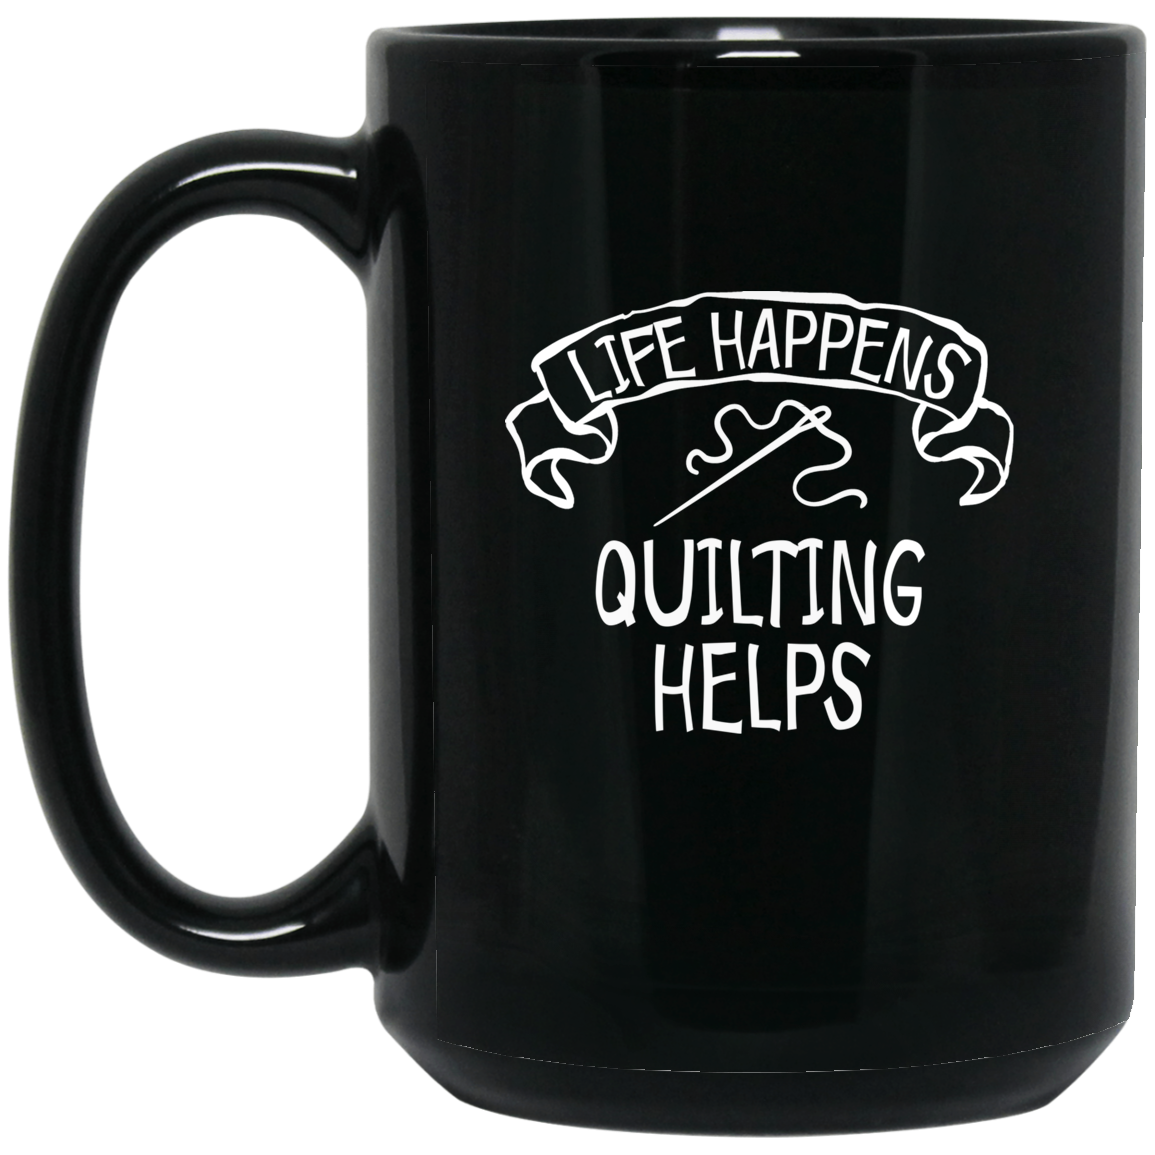 Life Happens - Quilting Helps Black Mugs